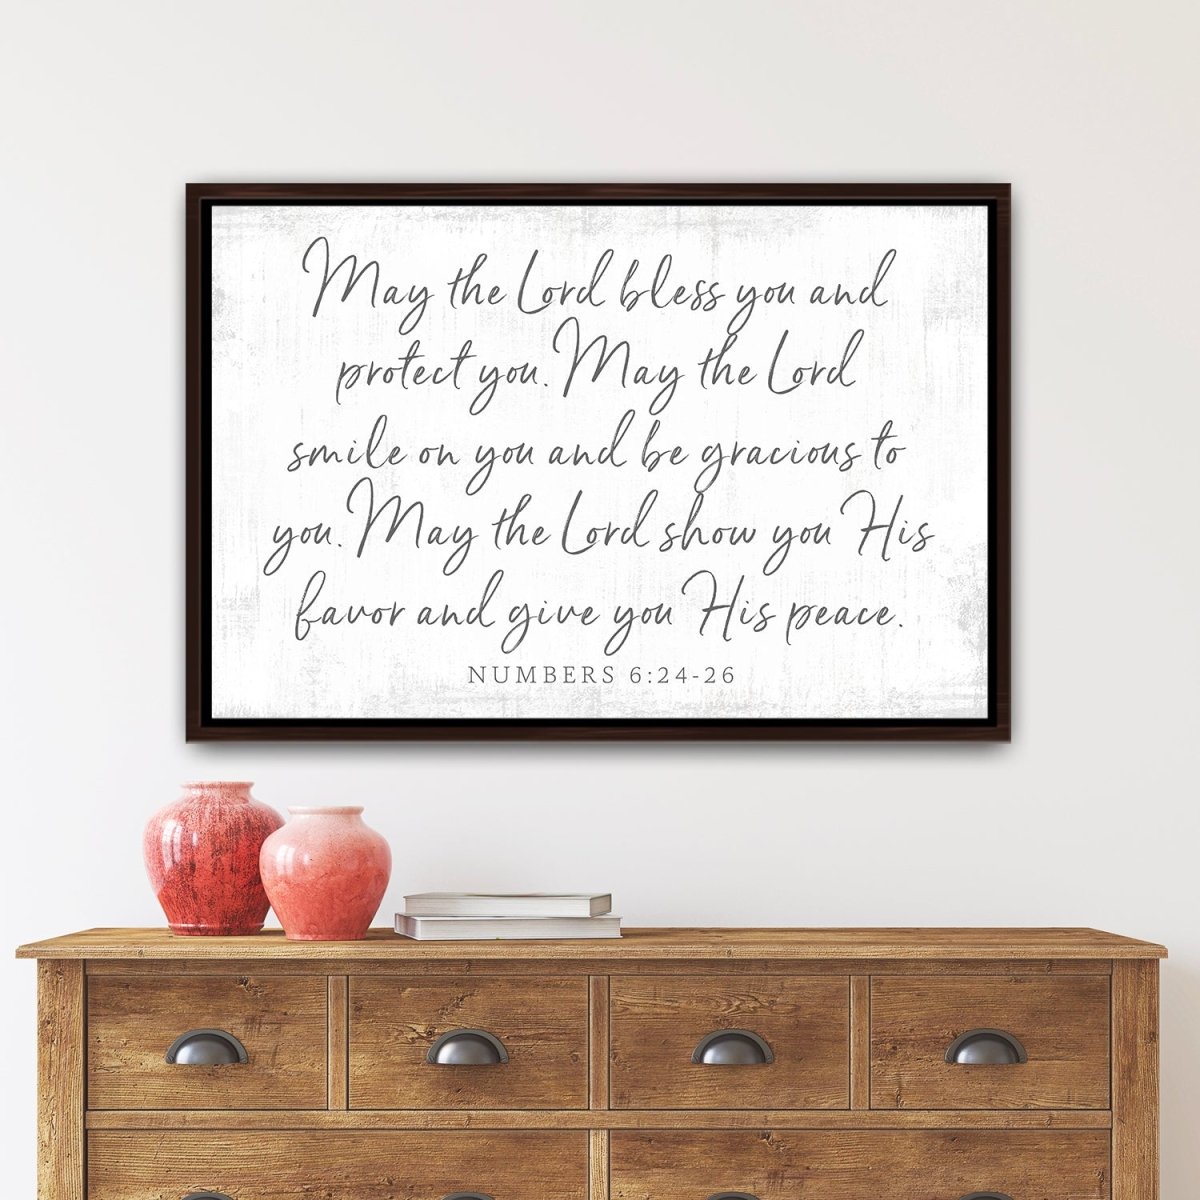 Threshold Blessing Numbers 6:24-26 Bible Verse Christian Family Sign Above Dresser - Pretty Perfect Studio